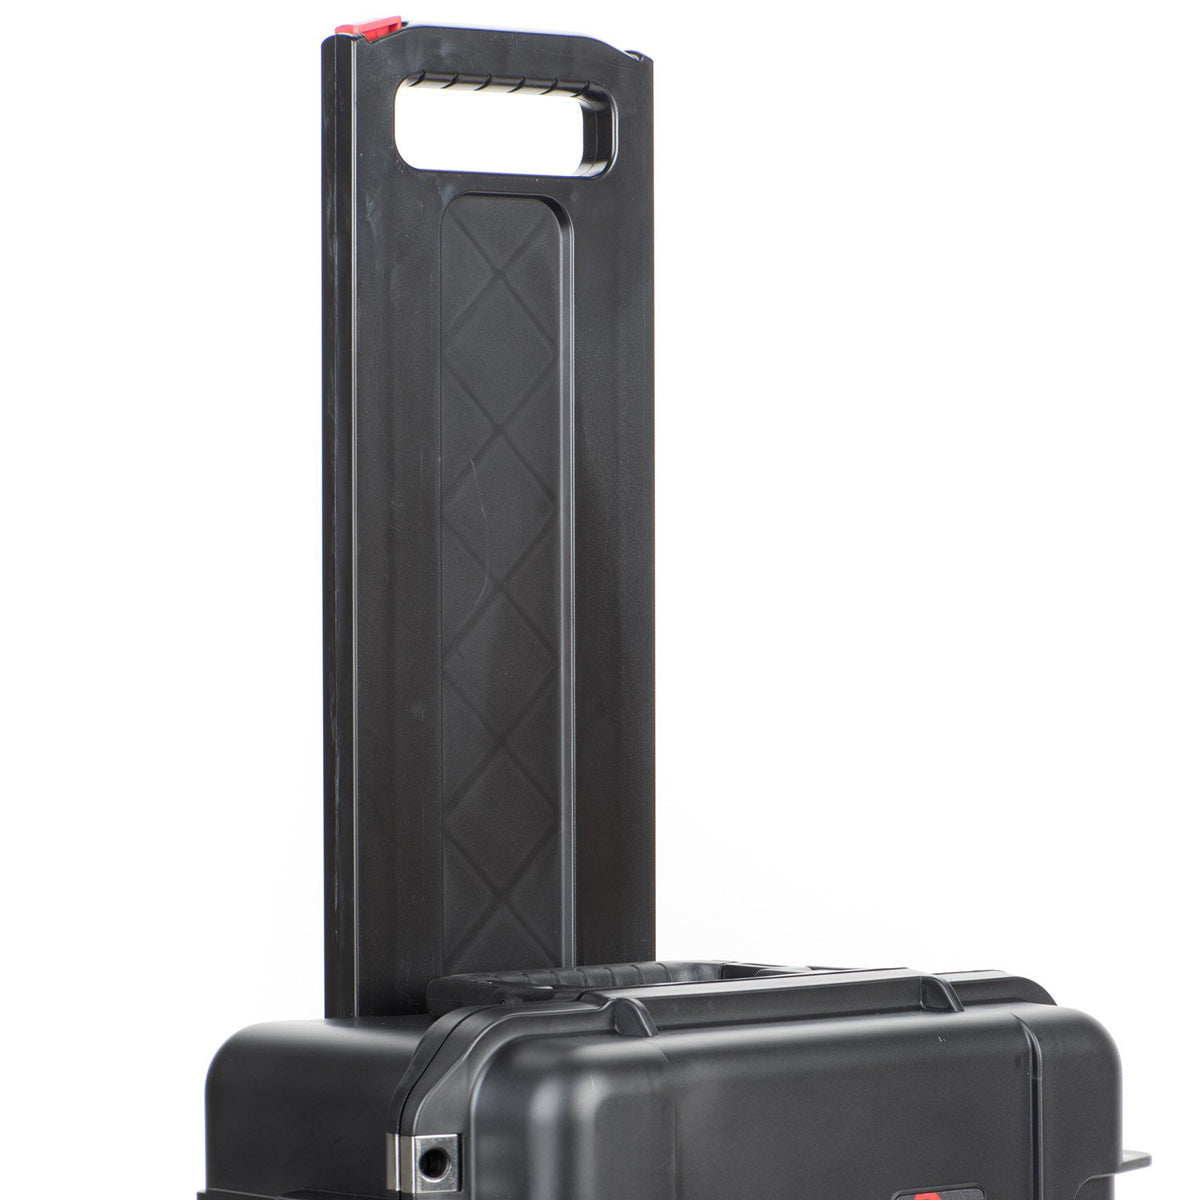 SKB iSeries 2011-7 Case with Think Tank Design Photo Dividers & Lid Organizer (Black)